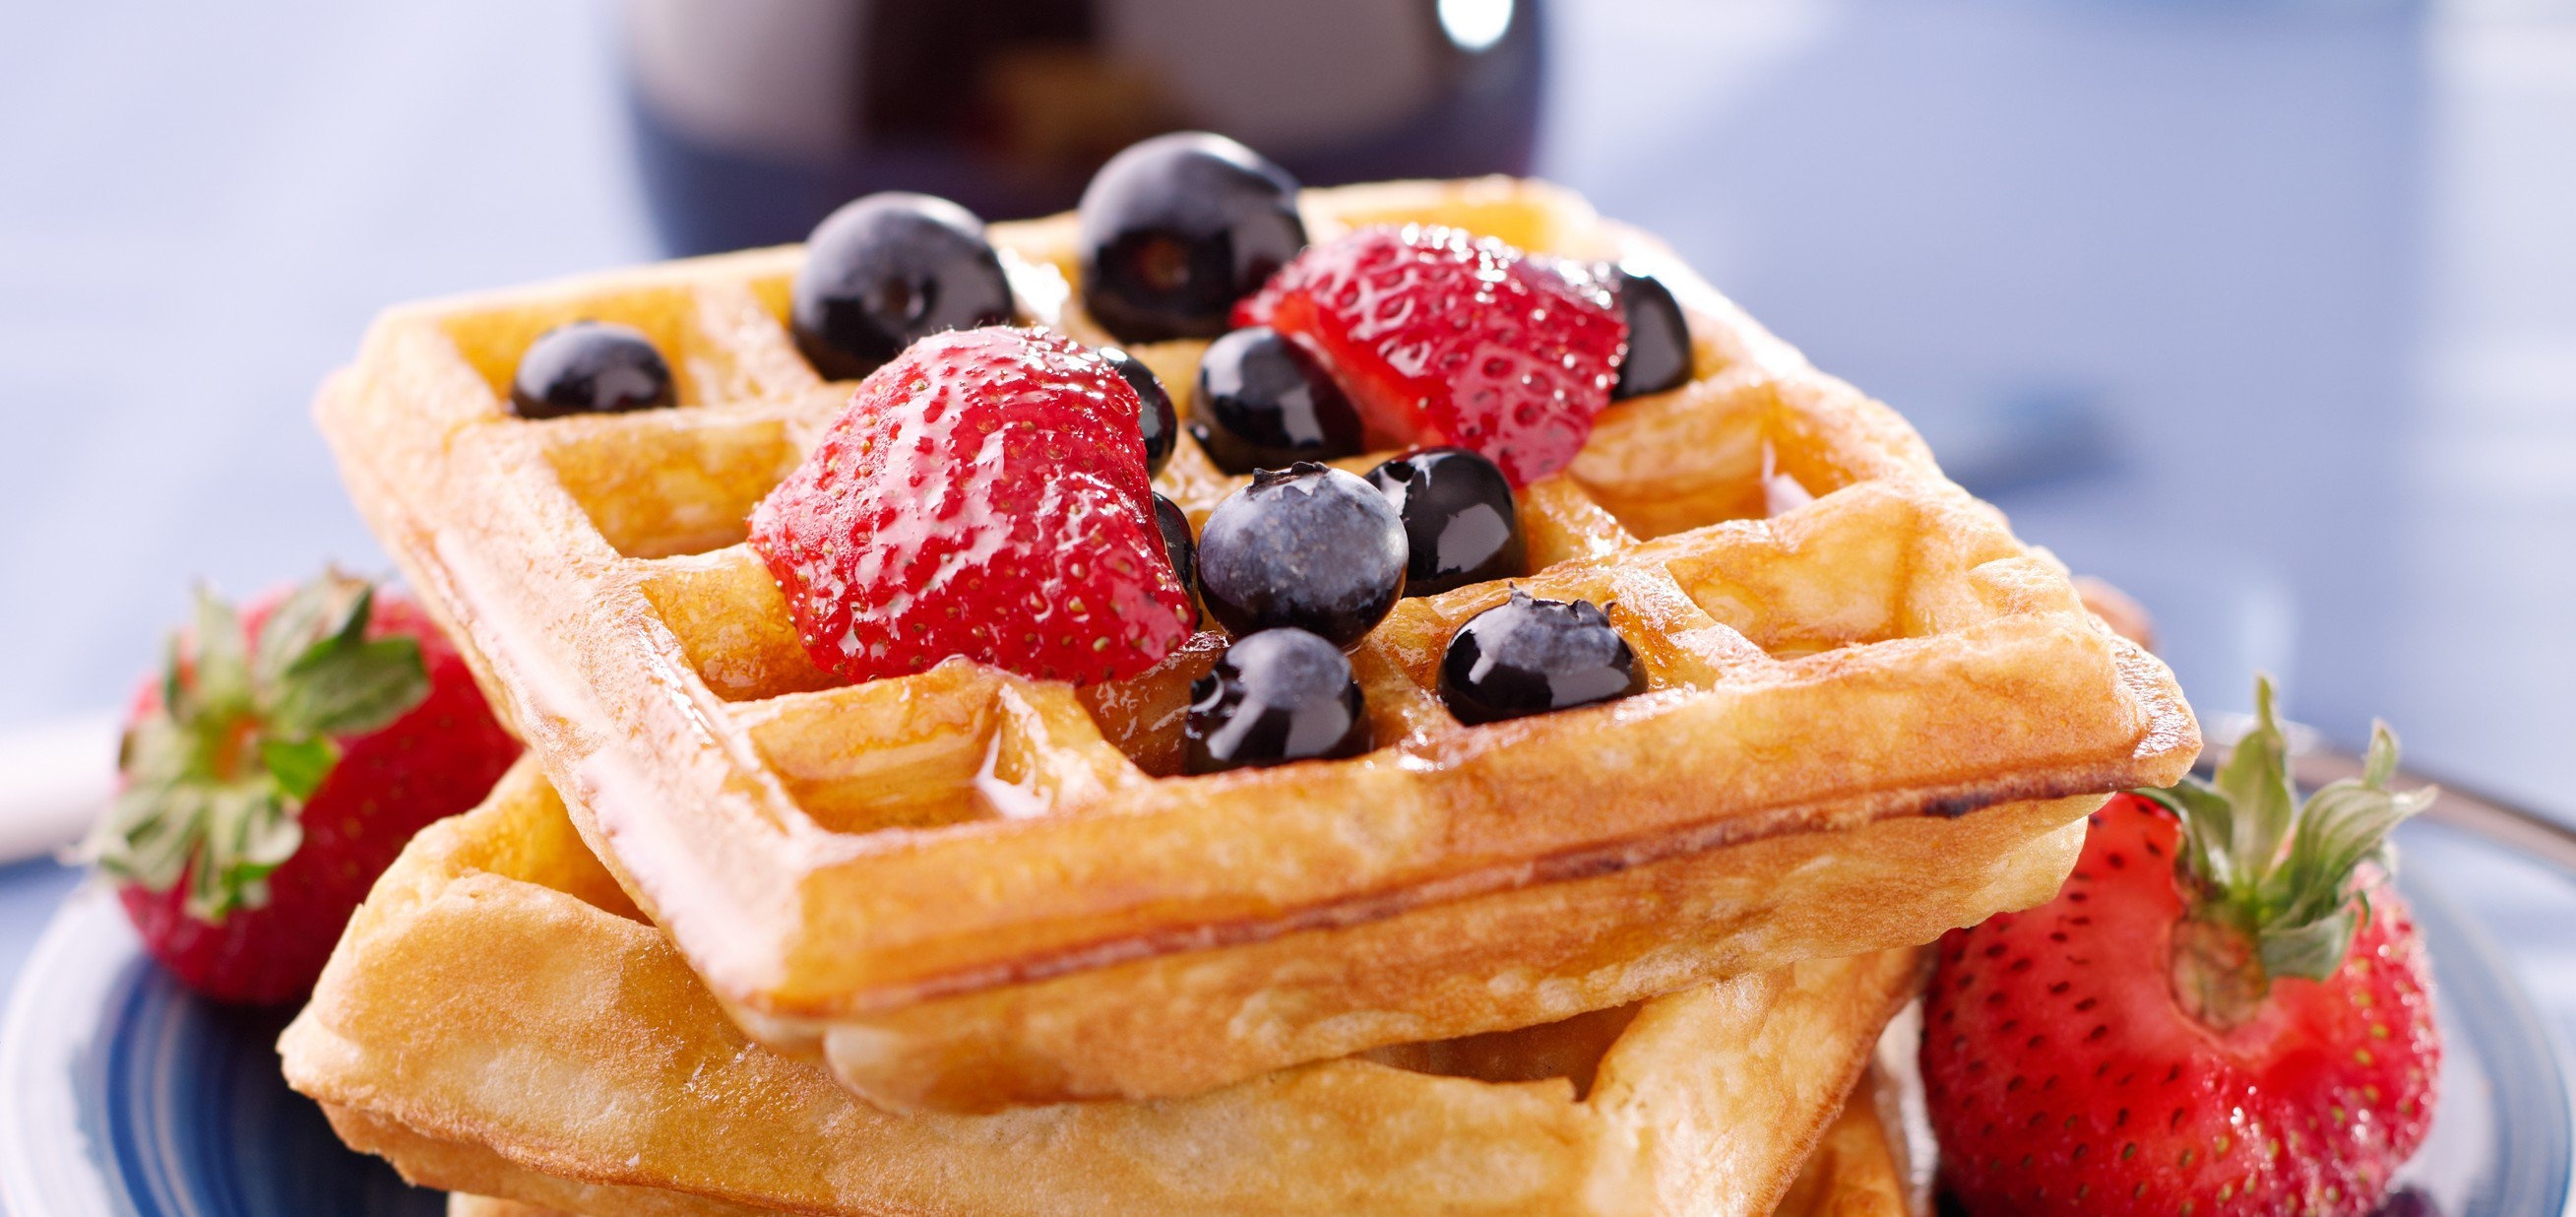 Waffle: The Liege waffles, have a dense, caramelized flavor due to the sugar used in the batter. 2620x1240 Dual Screen Wallpaper.